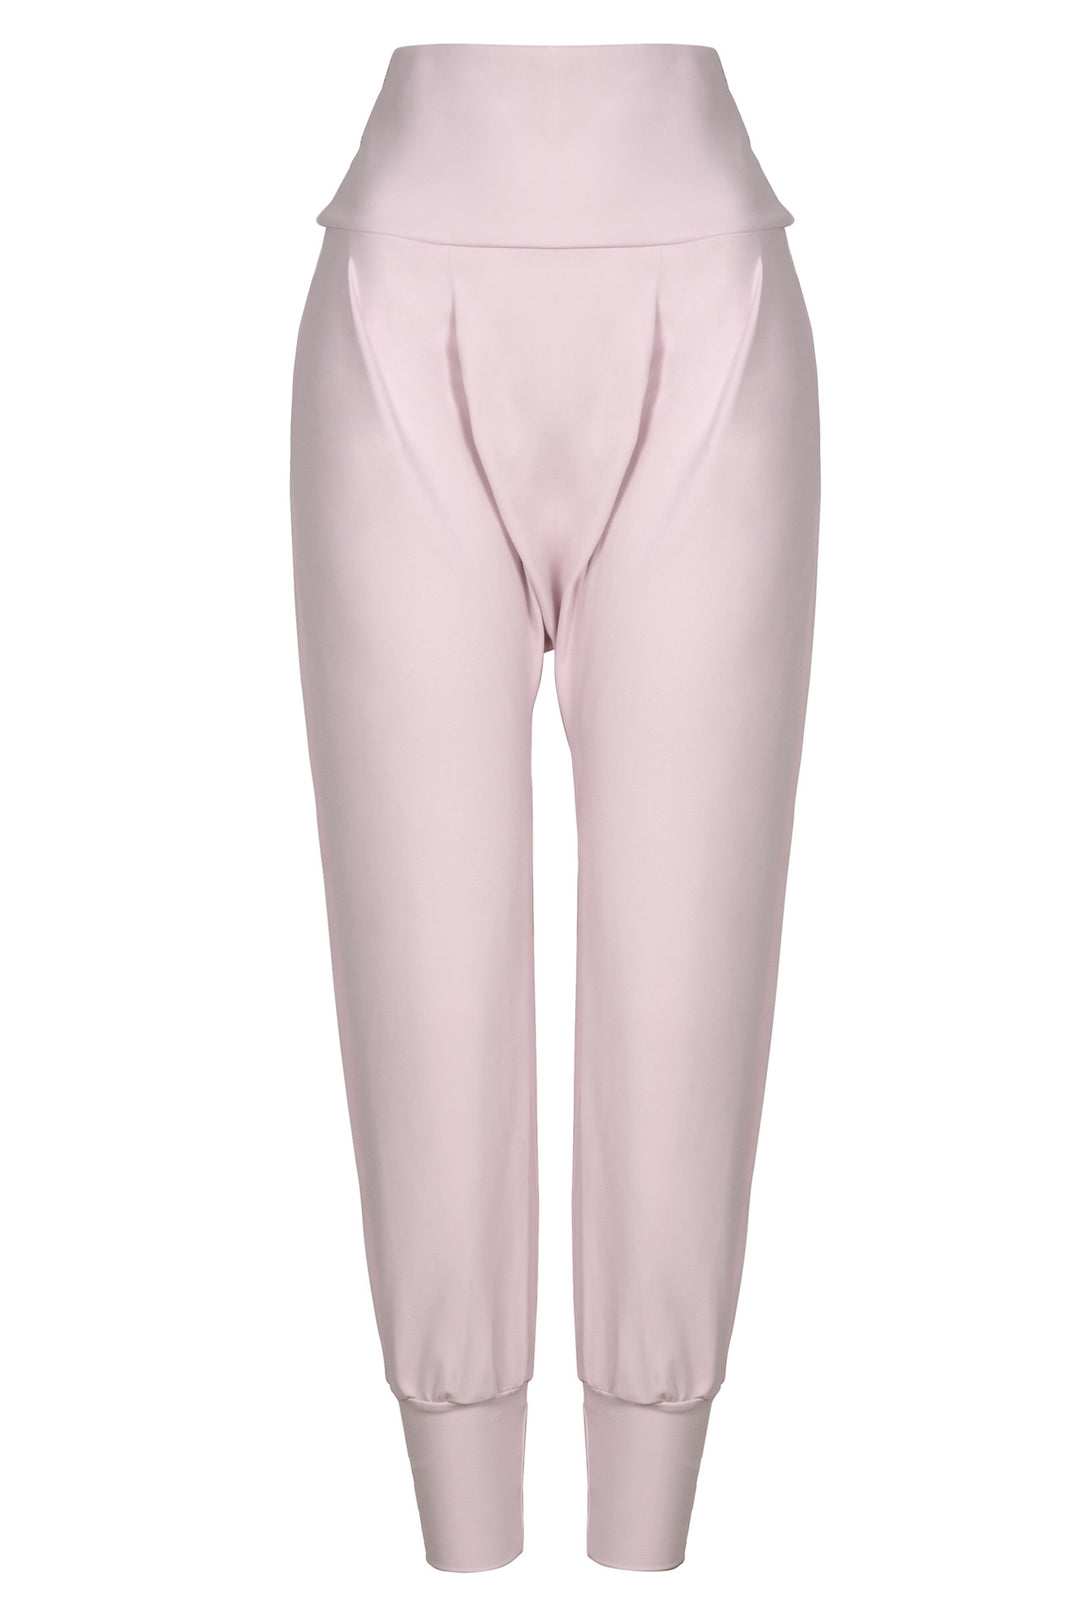 Parent's Choice Training Pants for Girls Nepal